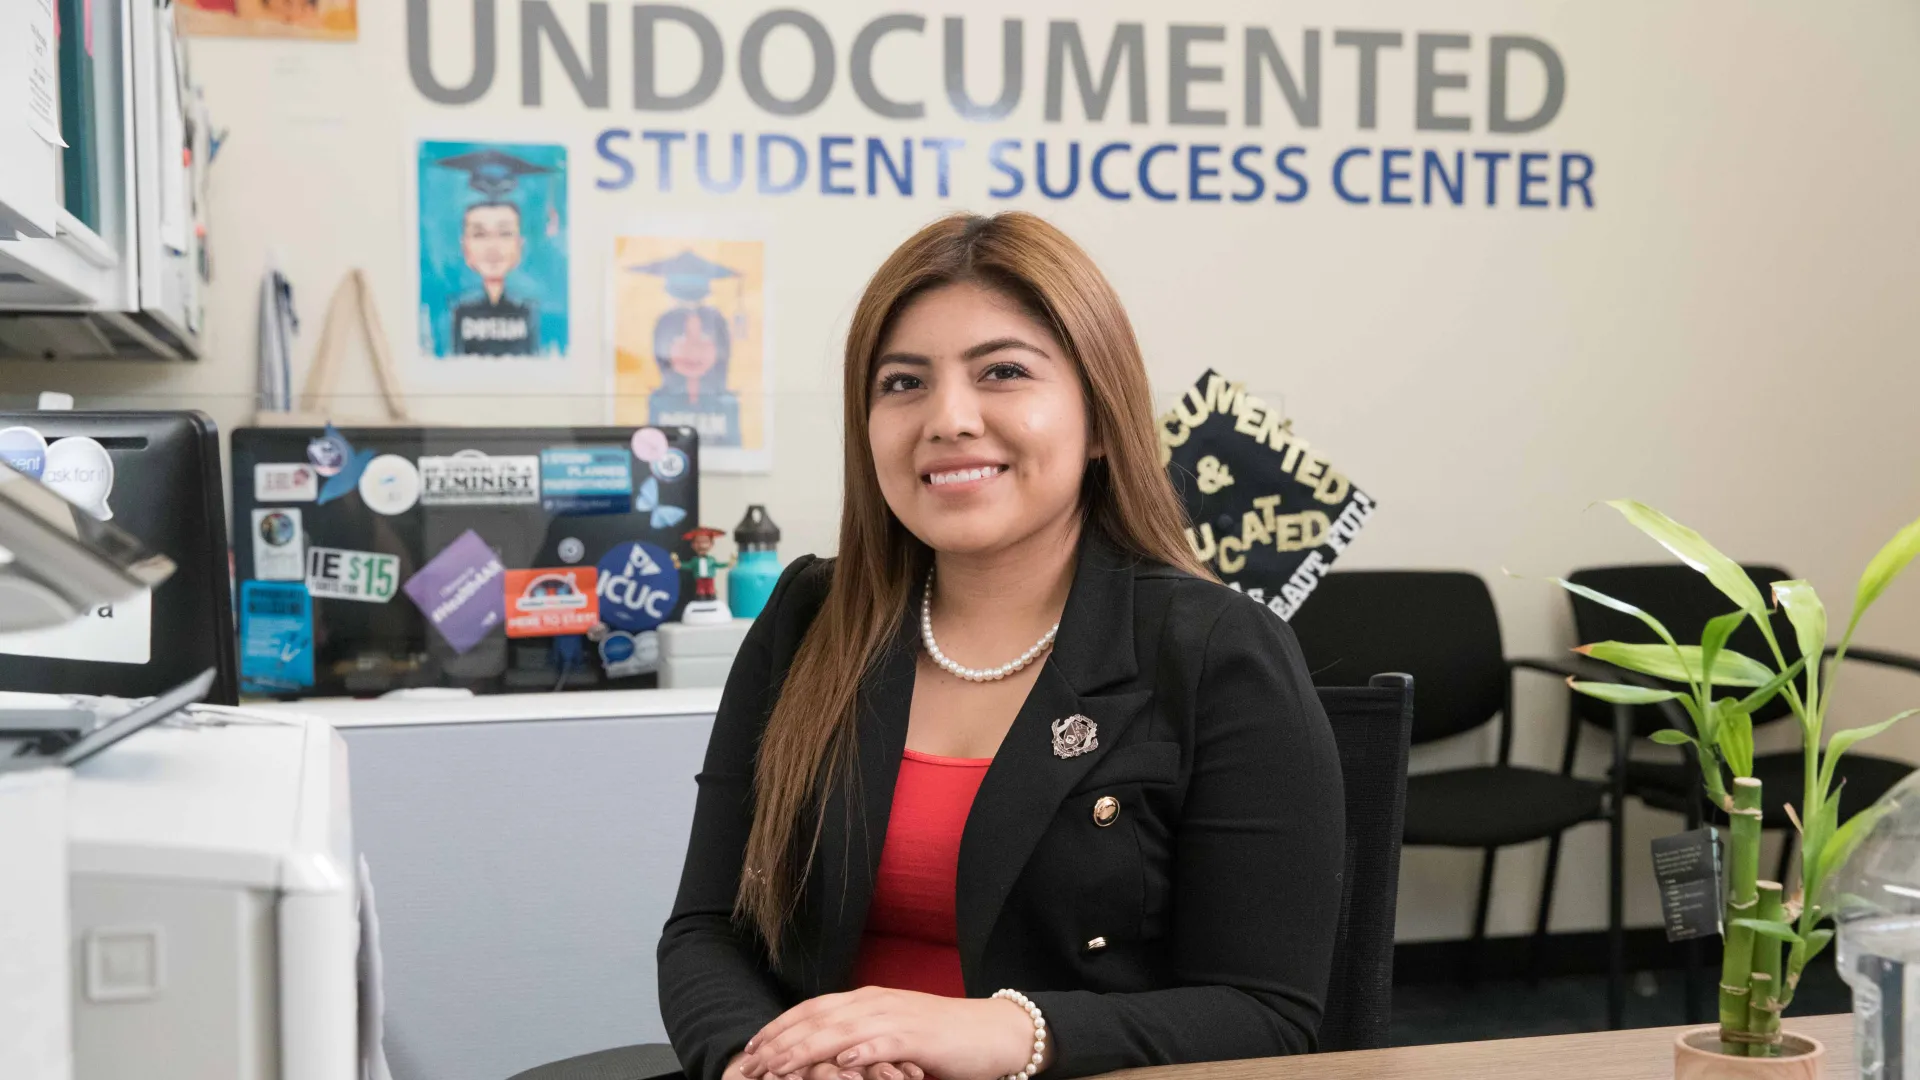 CSUSB has received a $120,000 grant from the California Campus Catalyst Fund to support the implementation and enhancement of programming and services for undocumented students and their families.